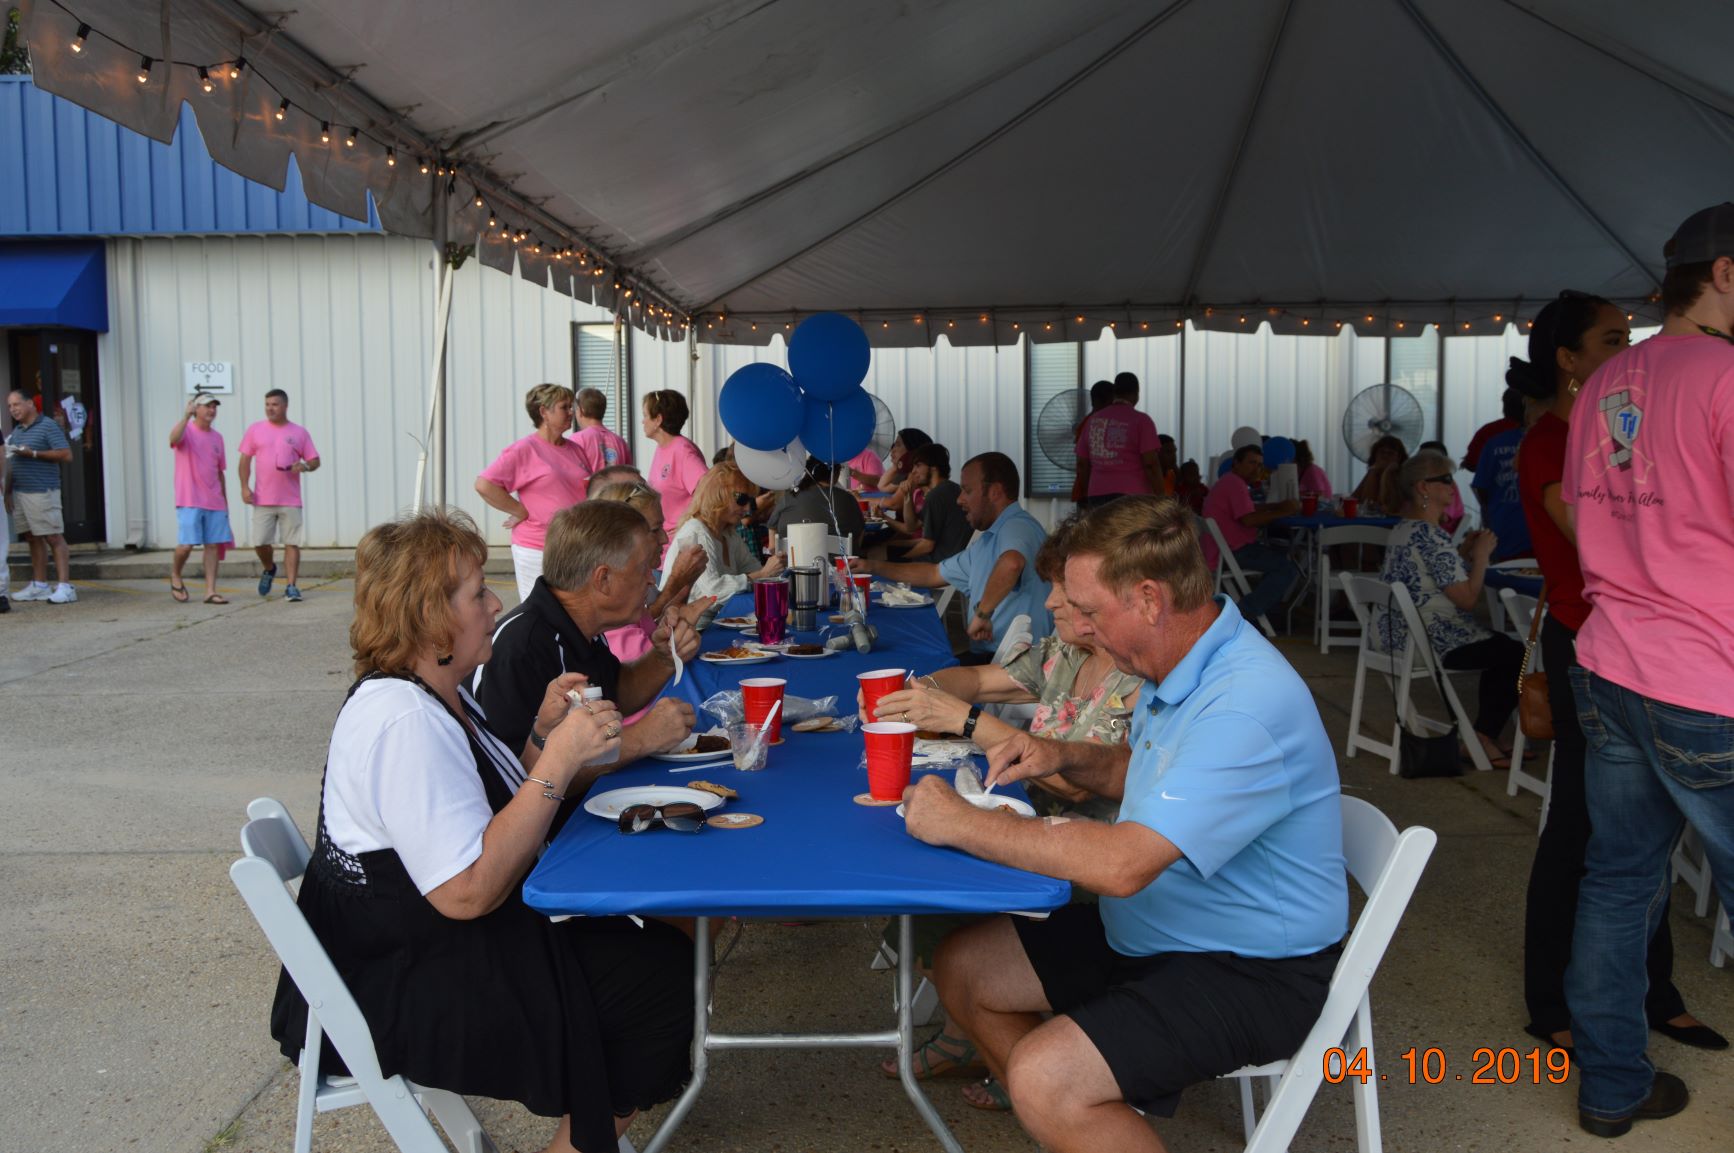 People Enjoyng the Fried Fish at the Threaded Fasteners Charitable Foundation Weekend 2019 Open House